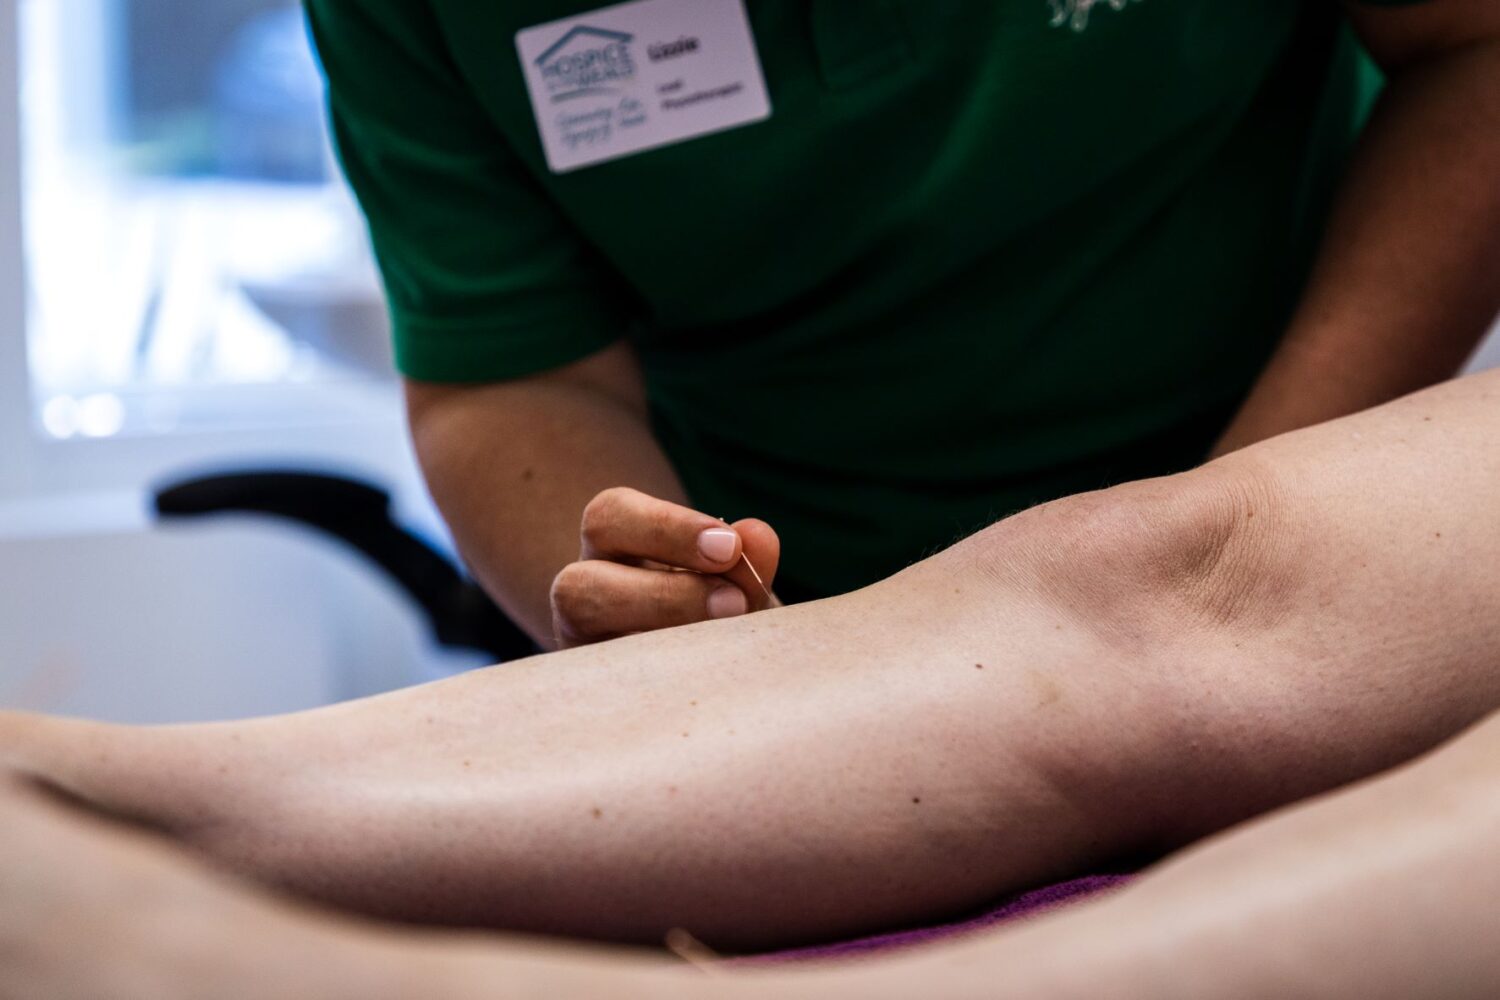 Lizzie performing acupuncture to a patient